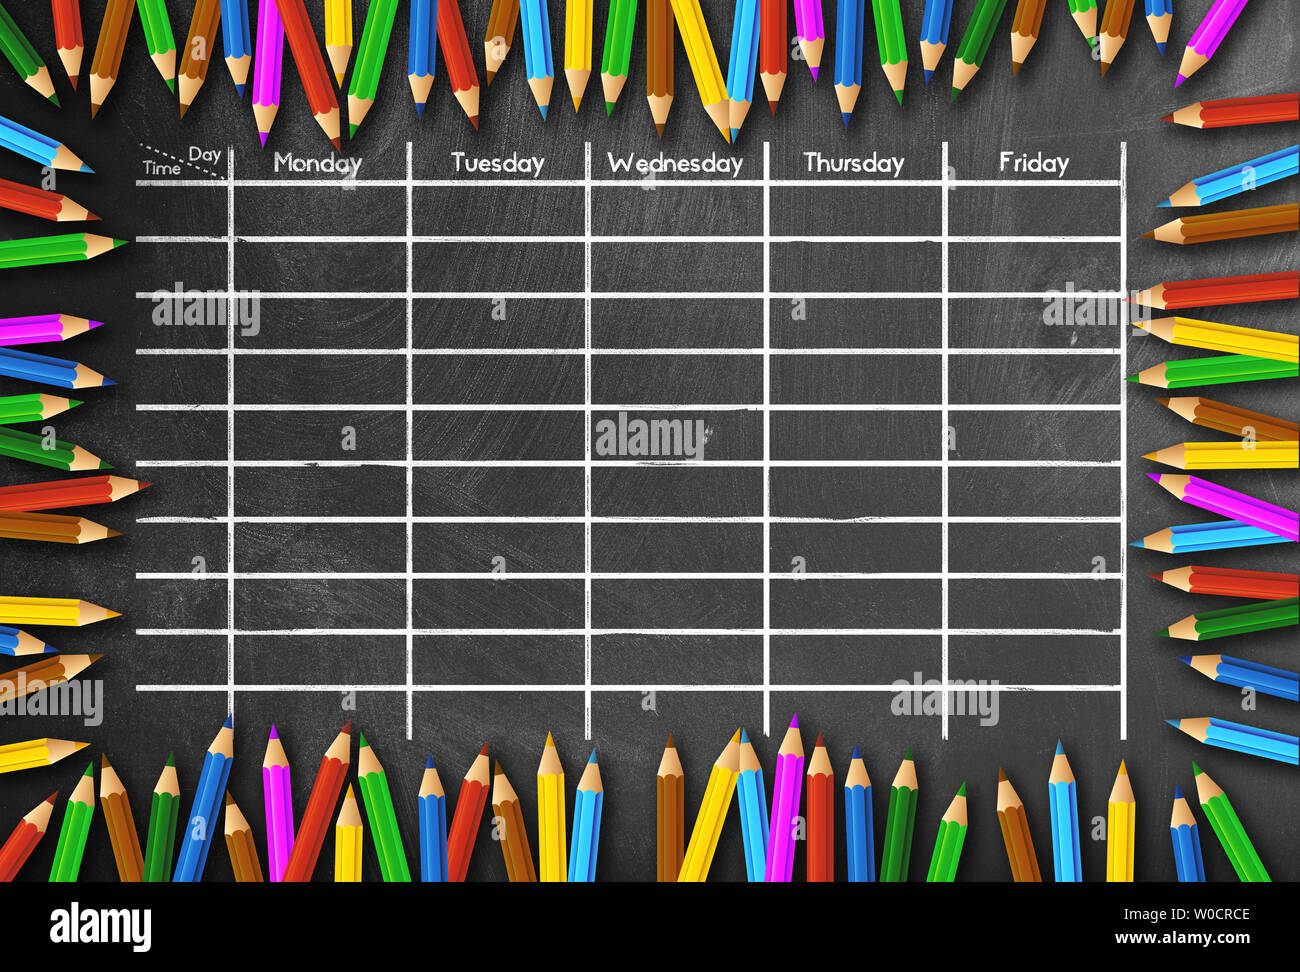 school timetable or class schedule template on blackboard framed by colored pencils Stock Photo